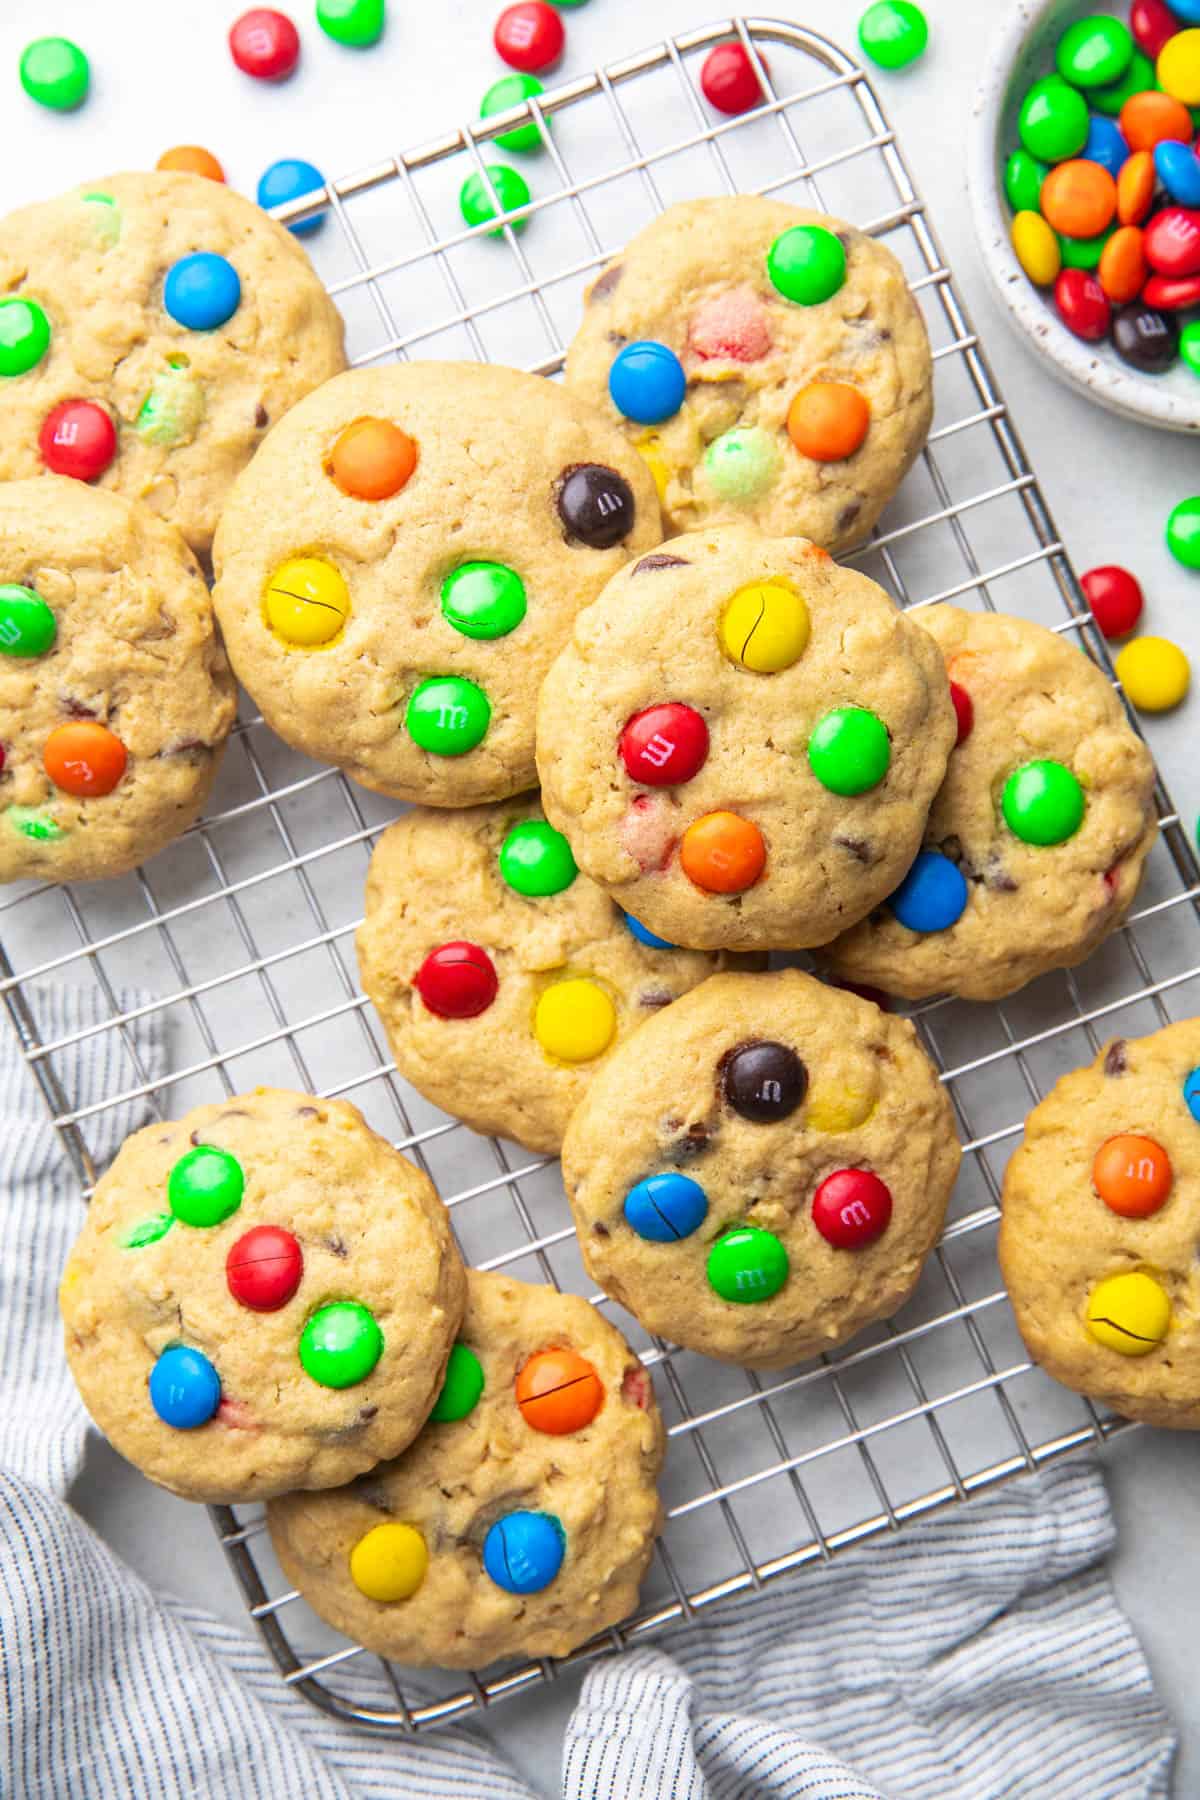 Cookies topped with M&Ms and chocolate chips on a wire rack.